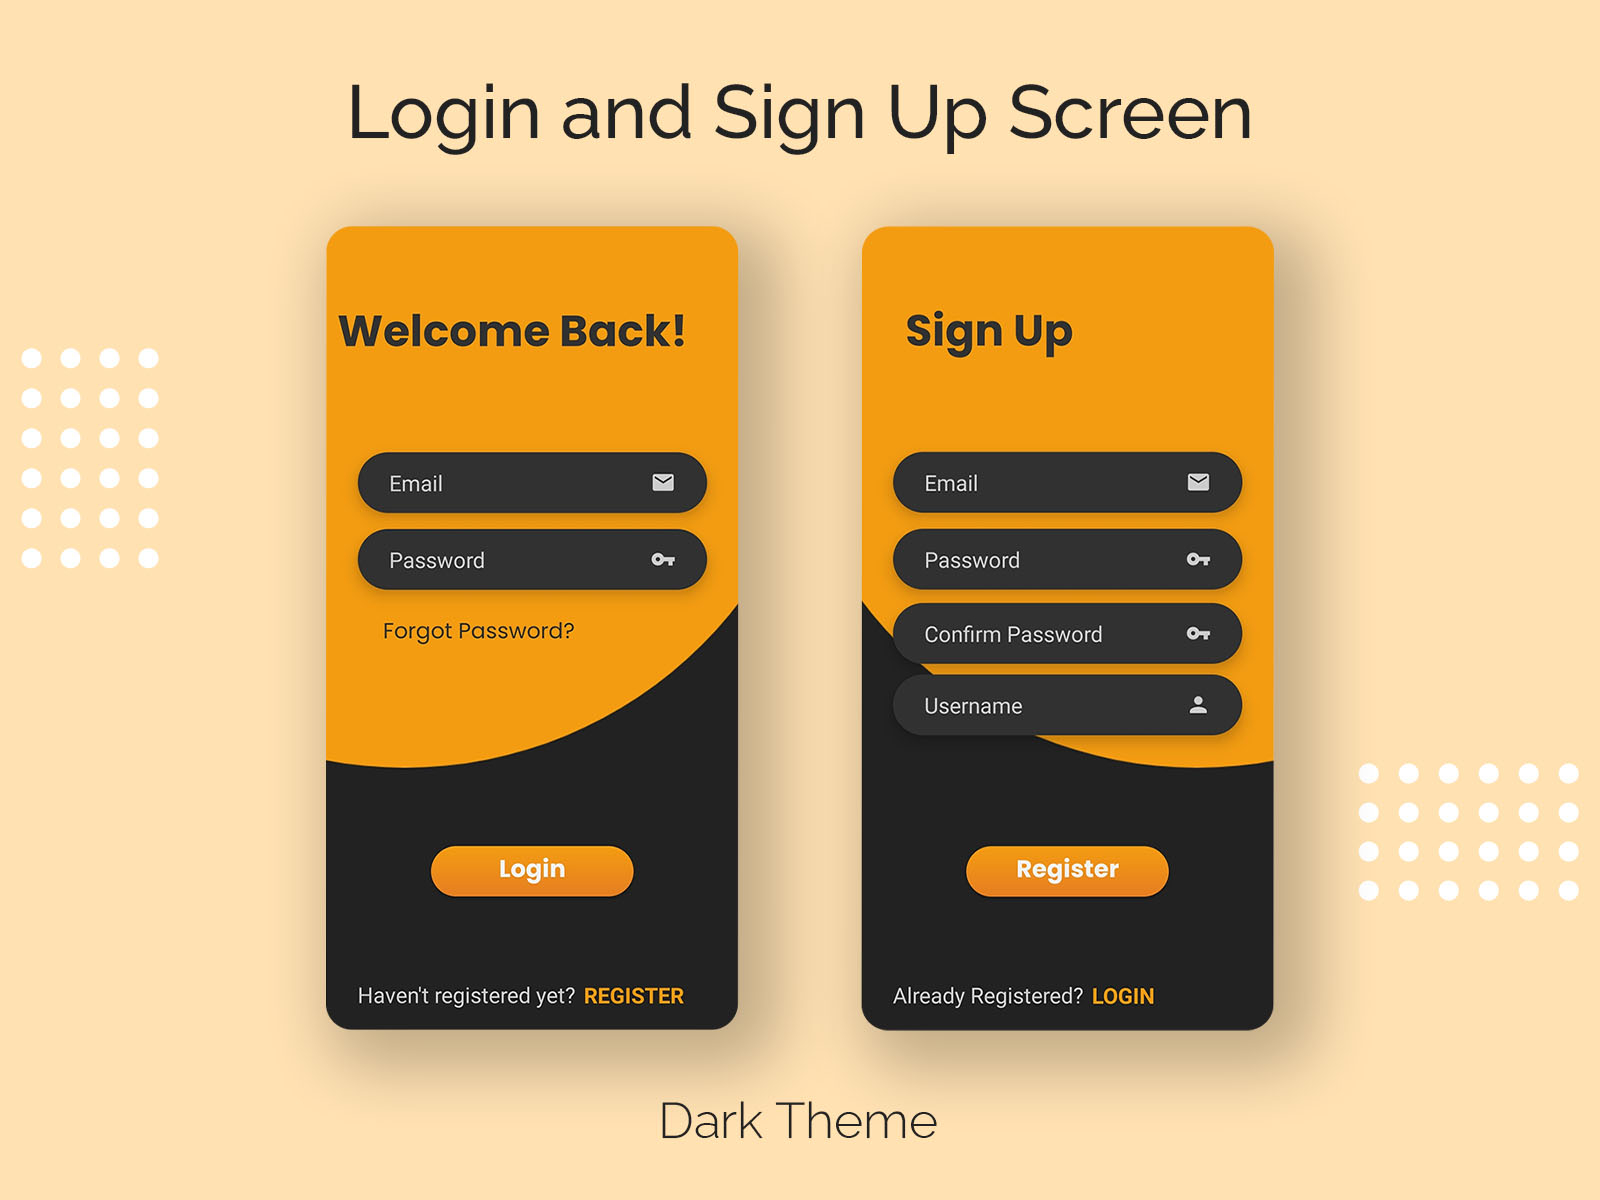 Login/Sign Up - Dark Theme by Rohin Bhat on Dribbble